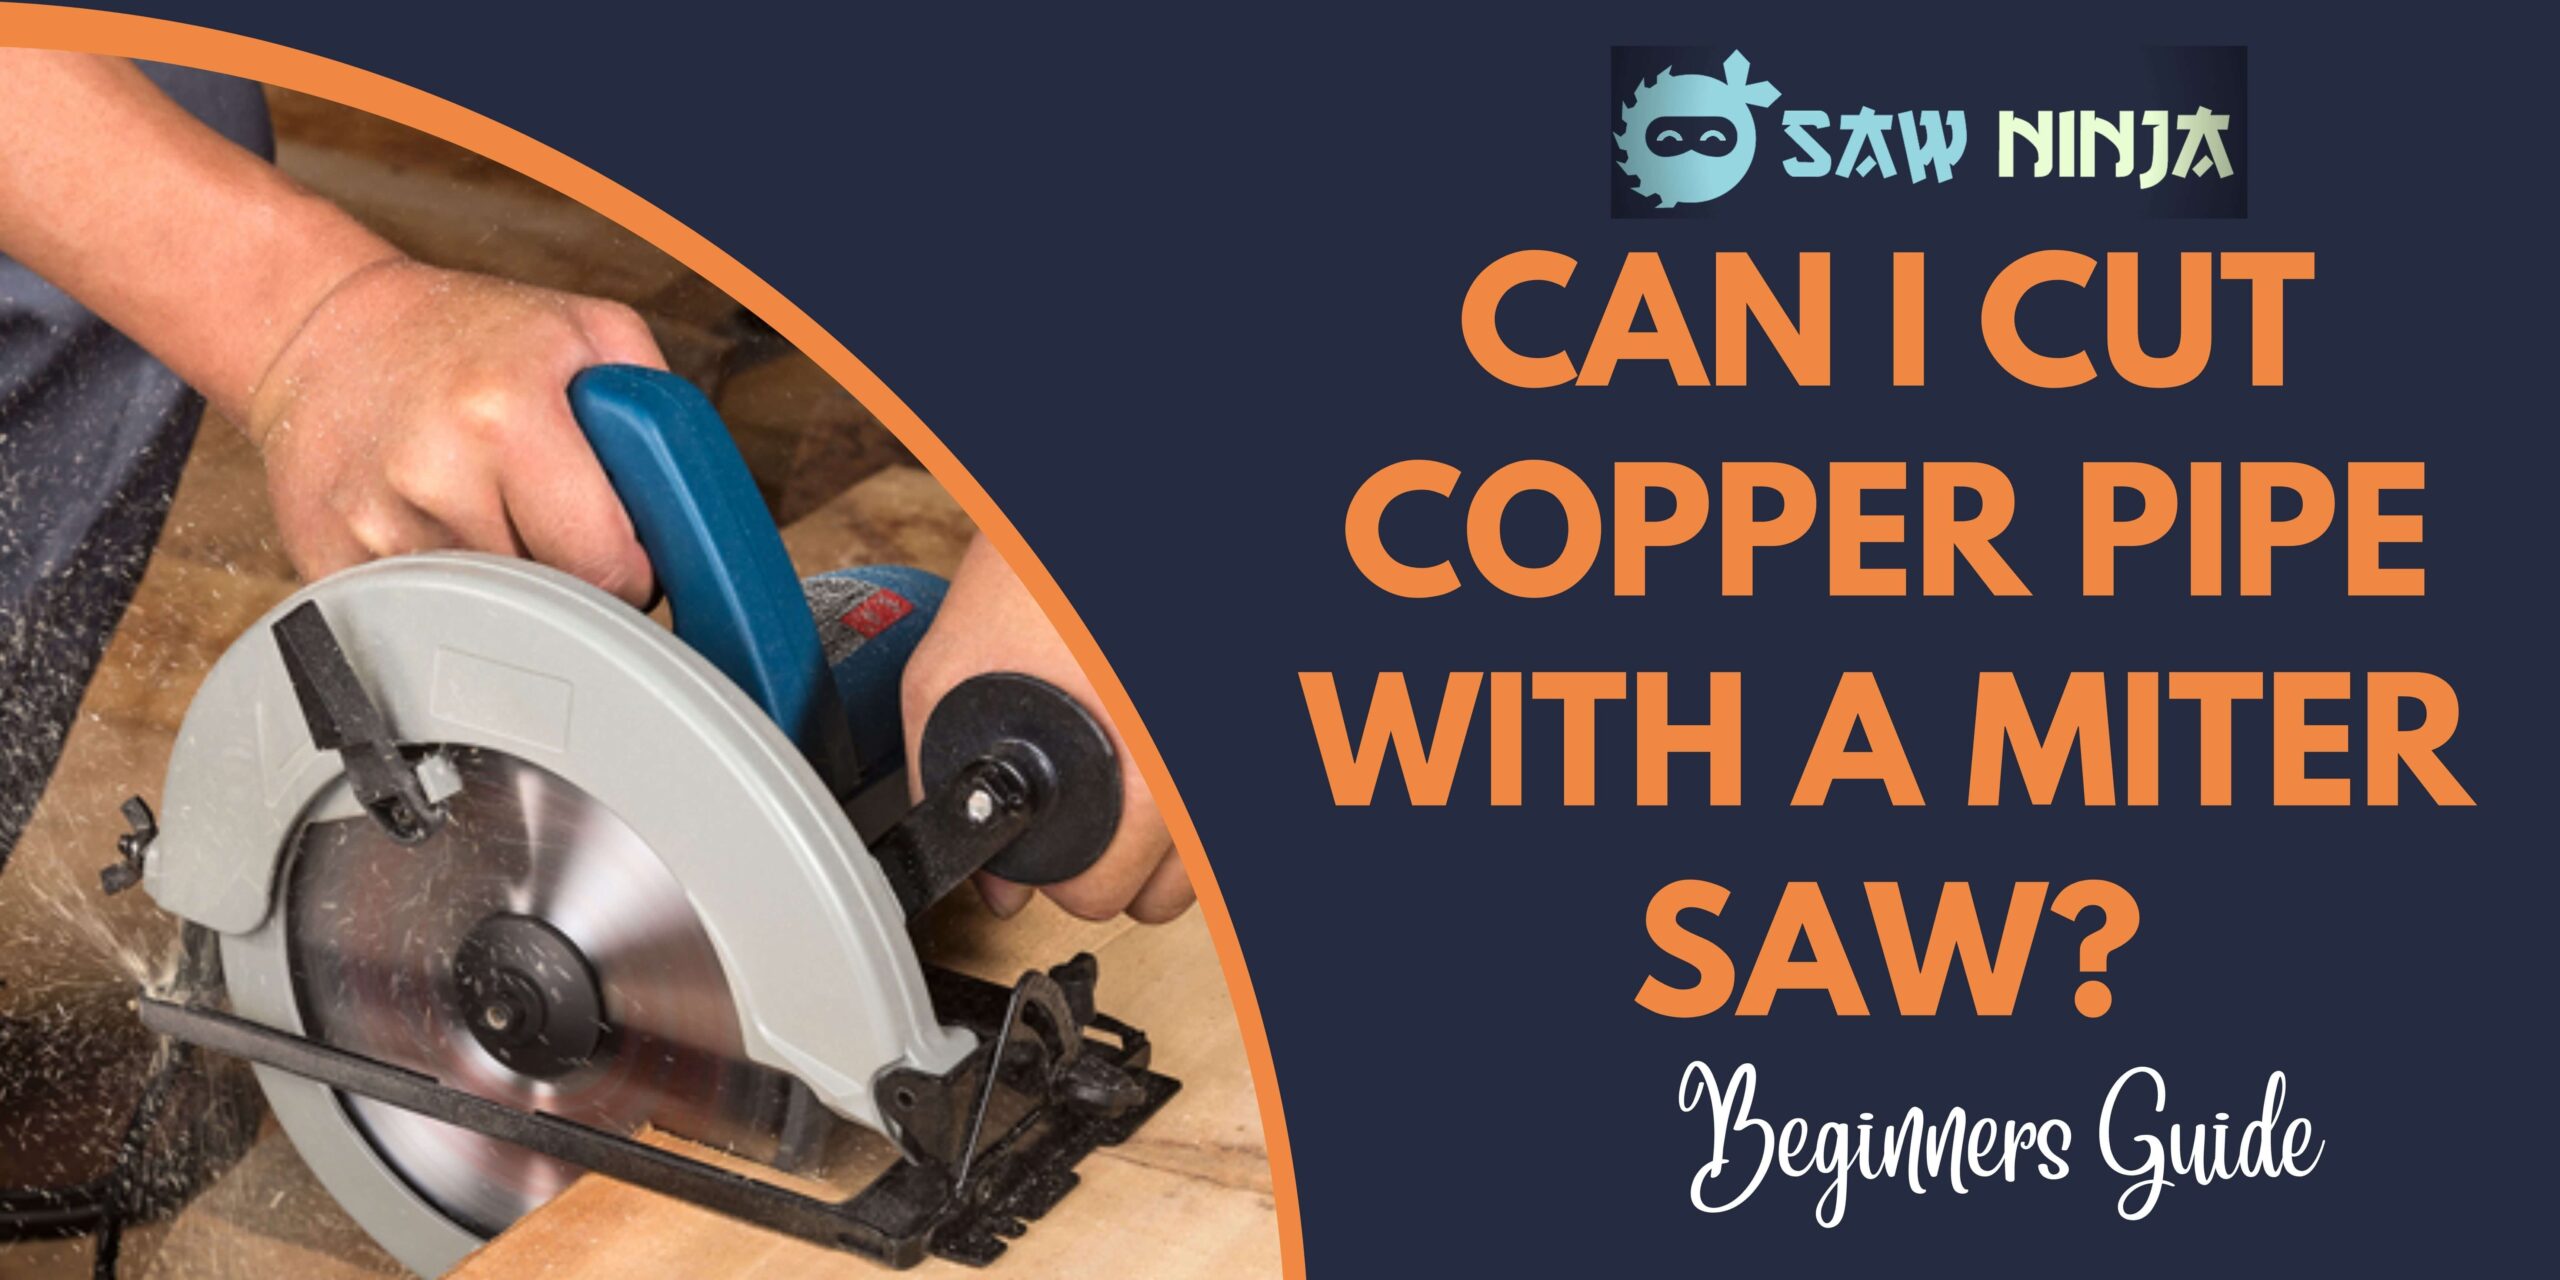 Can I Cut Copper Pipe With a Miter Saw